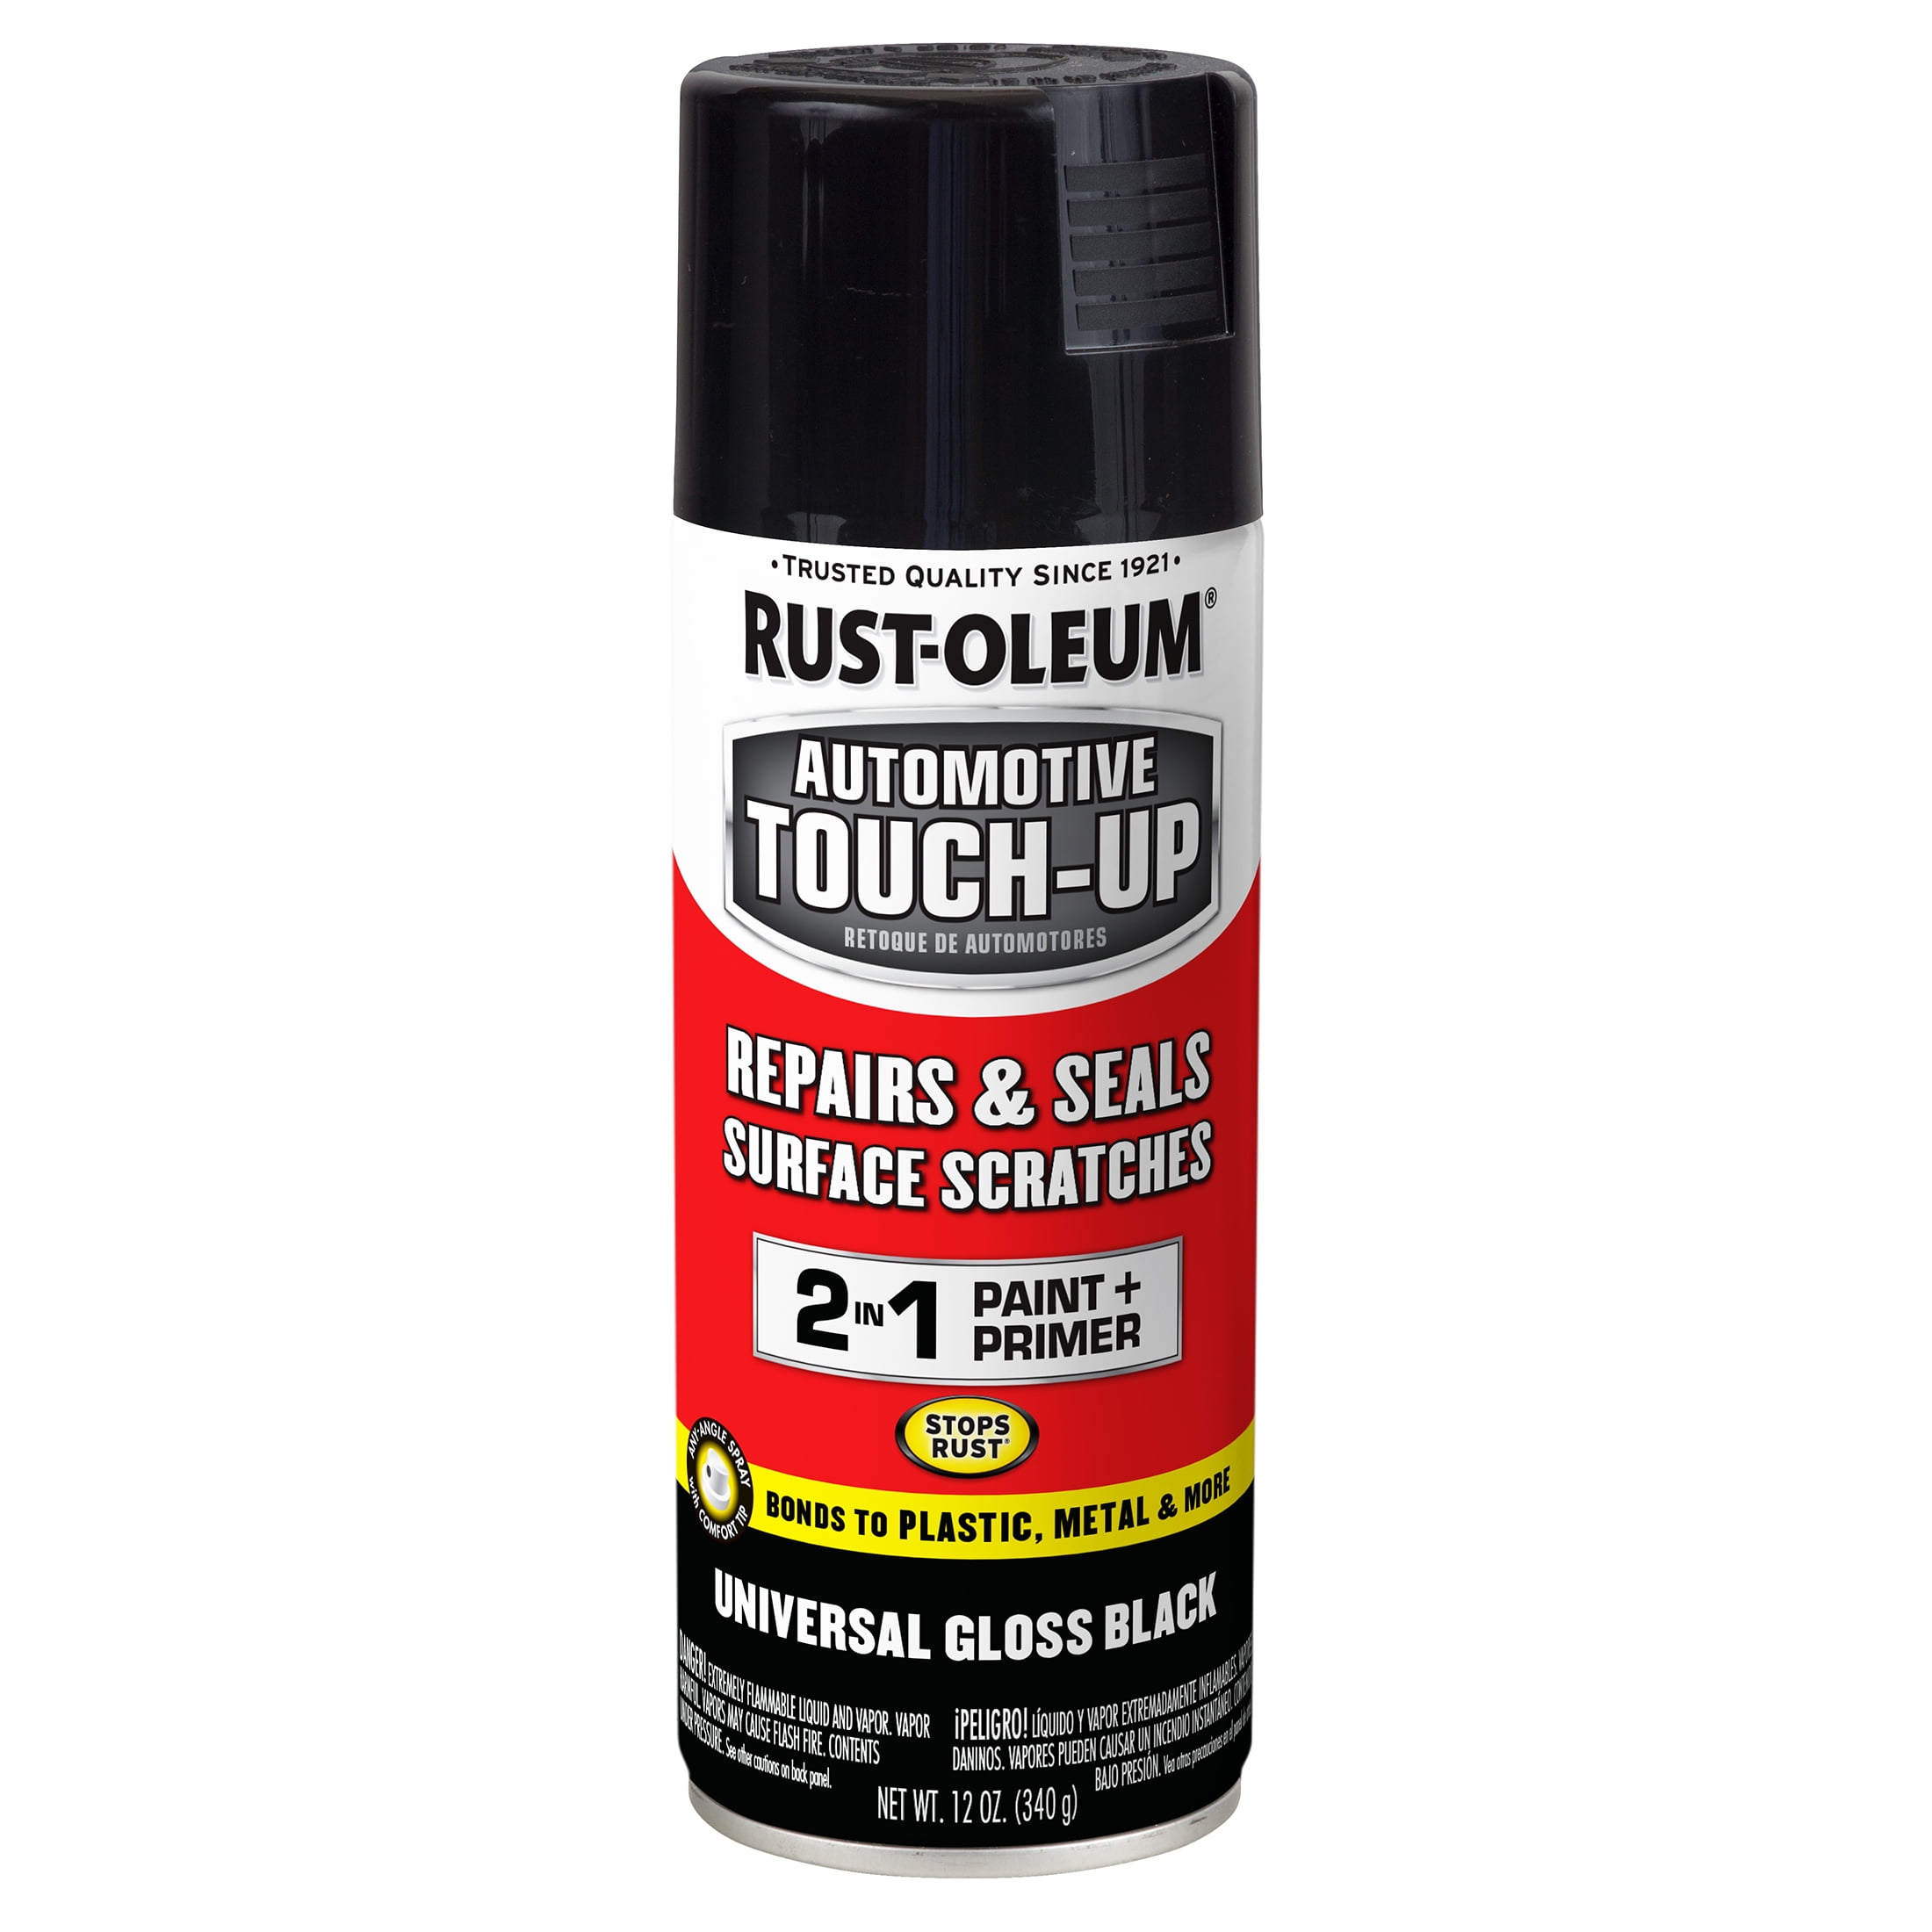 Universal Bright White, Rust-Oleum Gloss Automotive Touch-up Spray